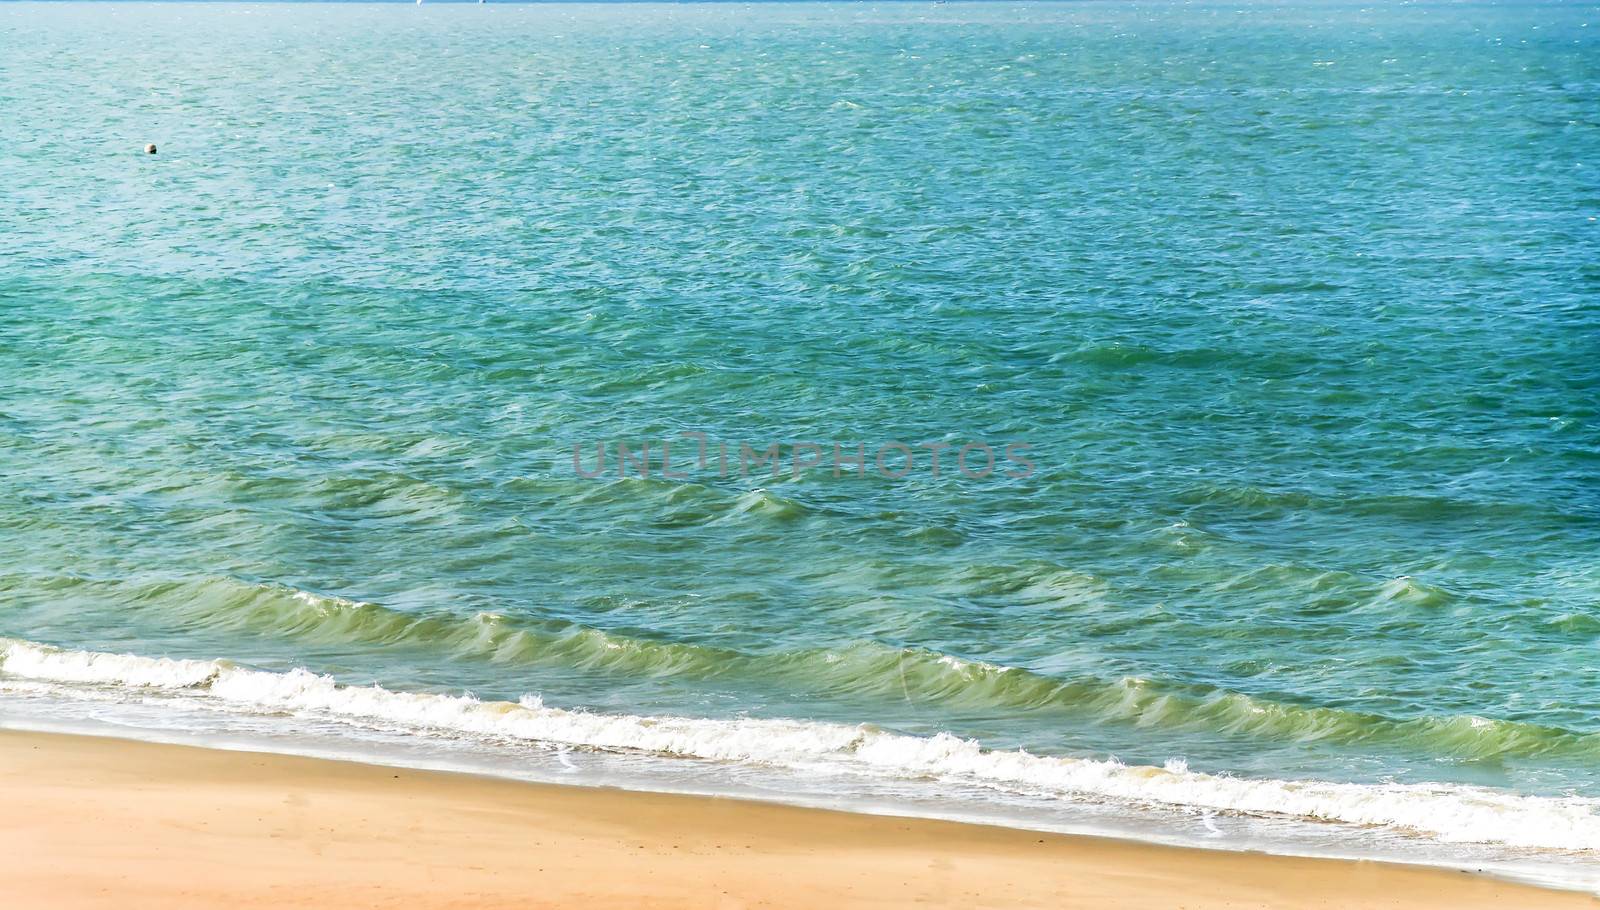 Sea beach background image by xfdly5